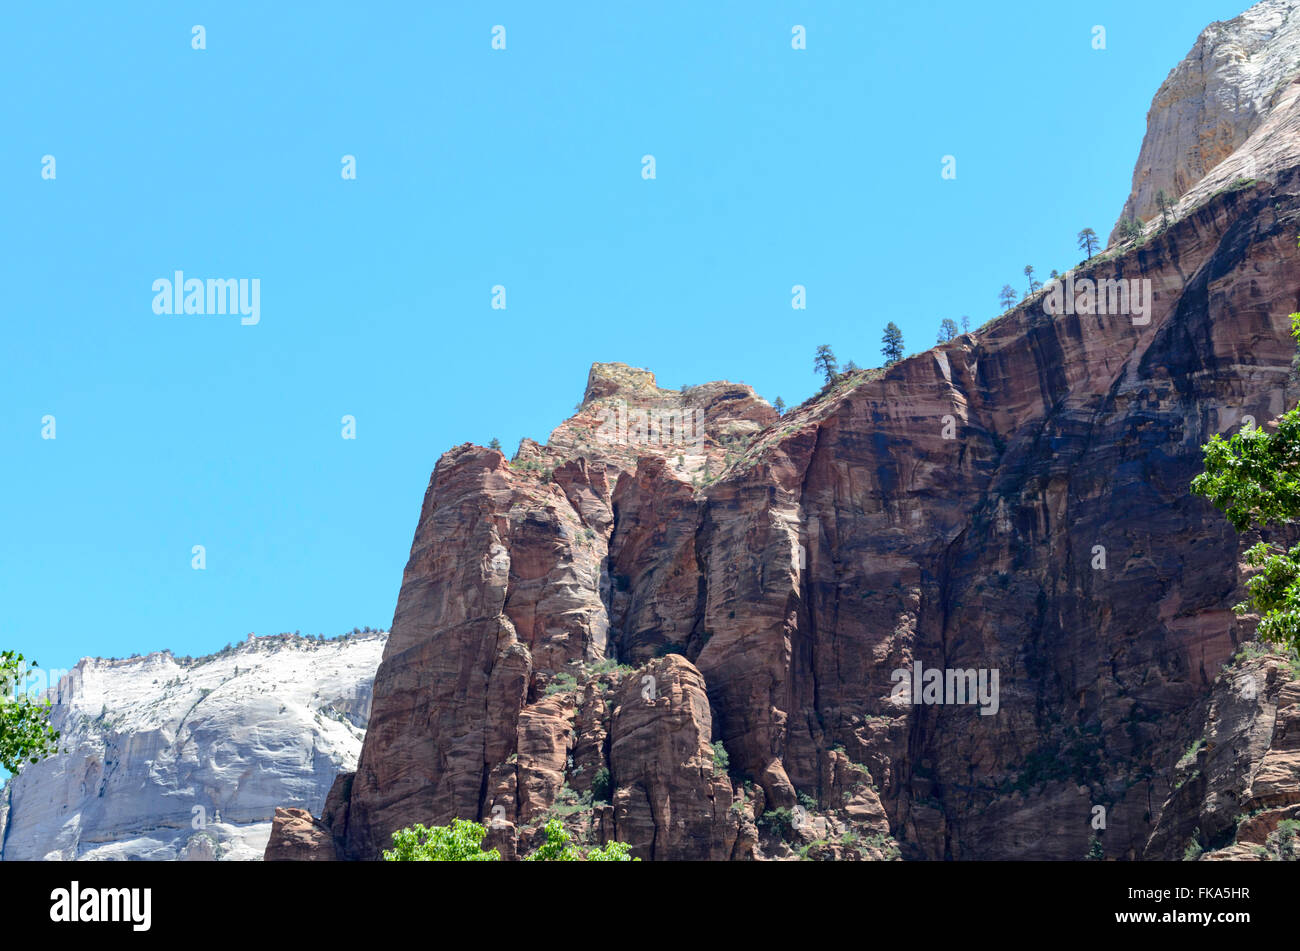 Scenic view of tall mountains under blue sky in Zion National Park, Utah. Stock Photo